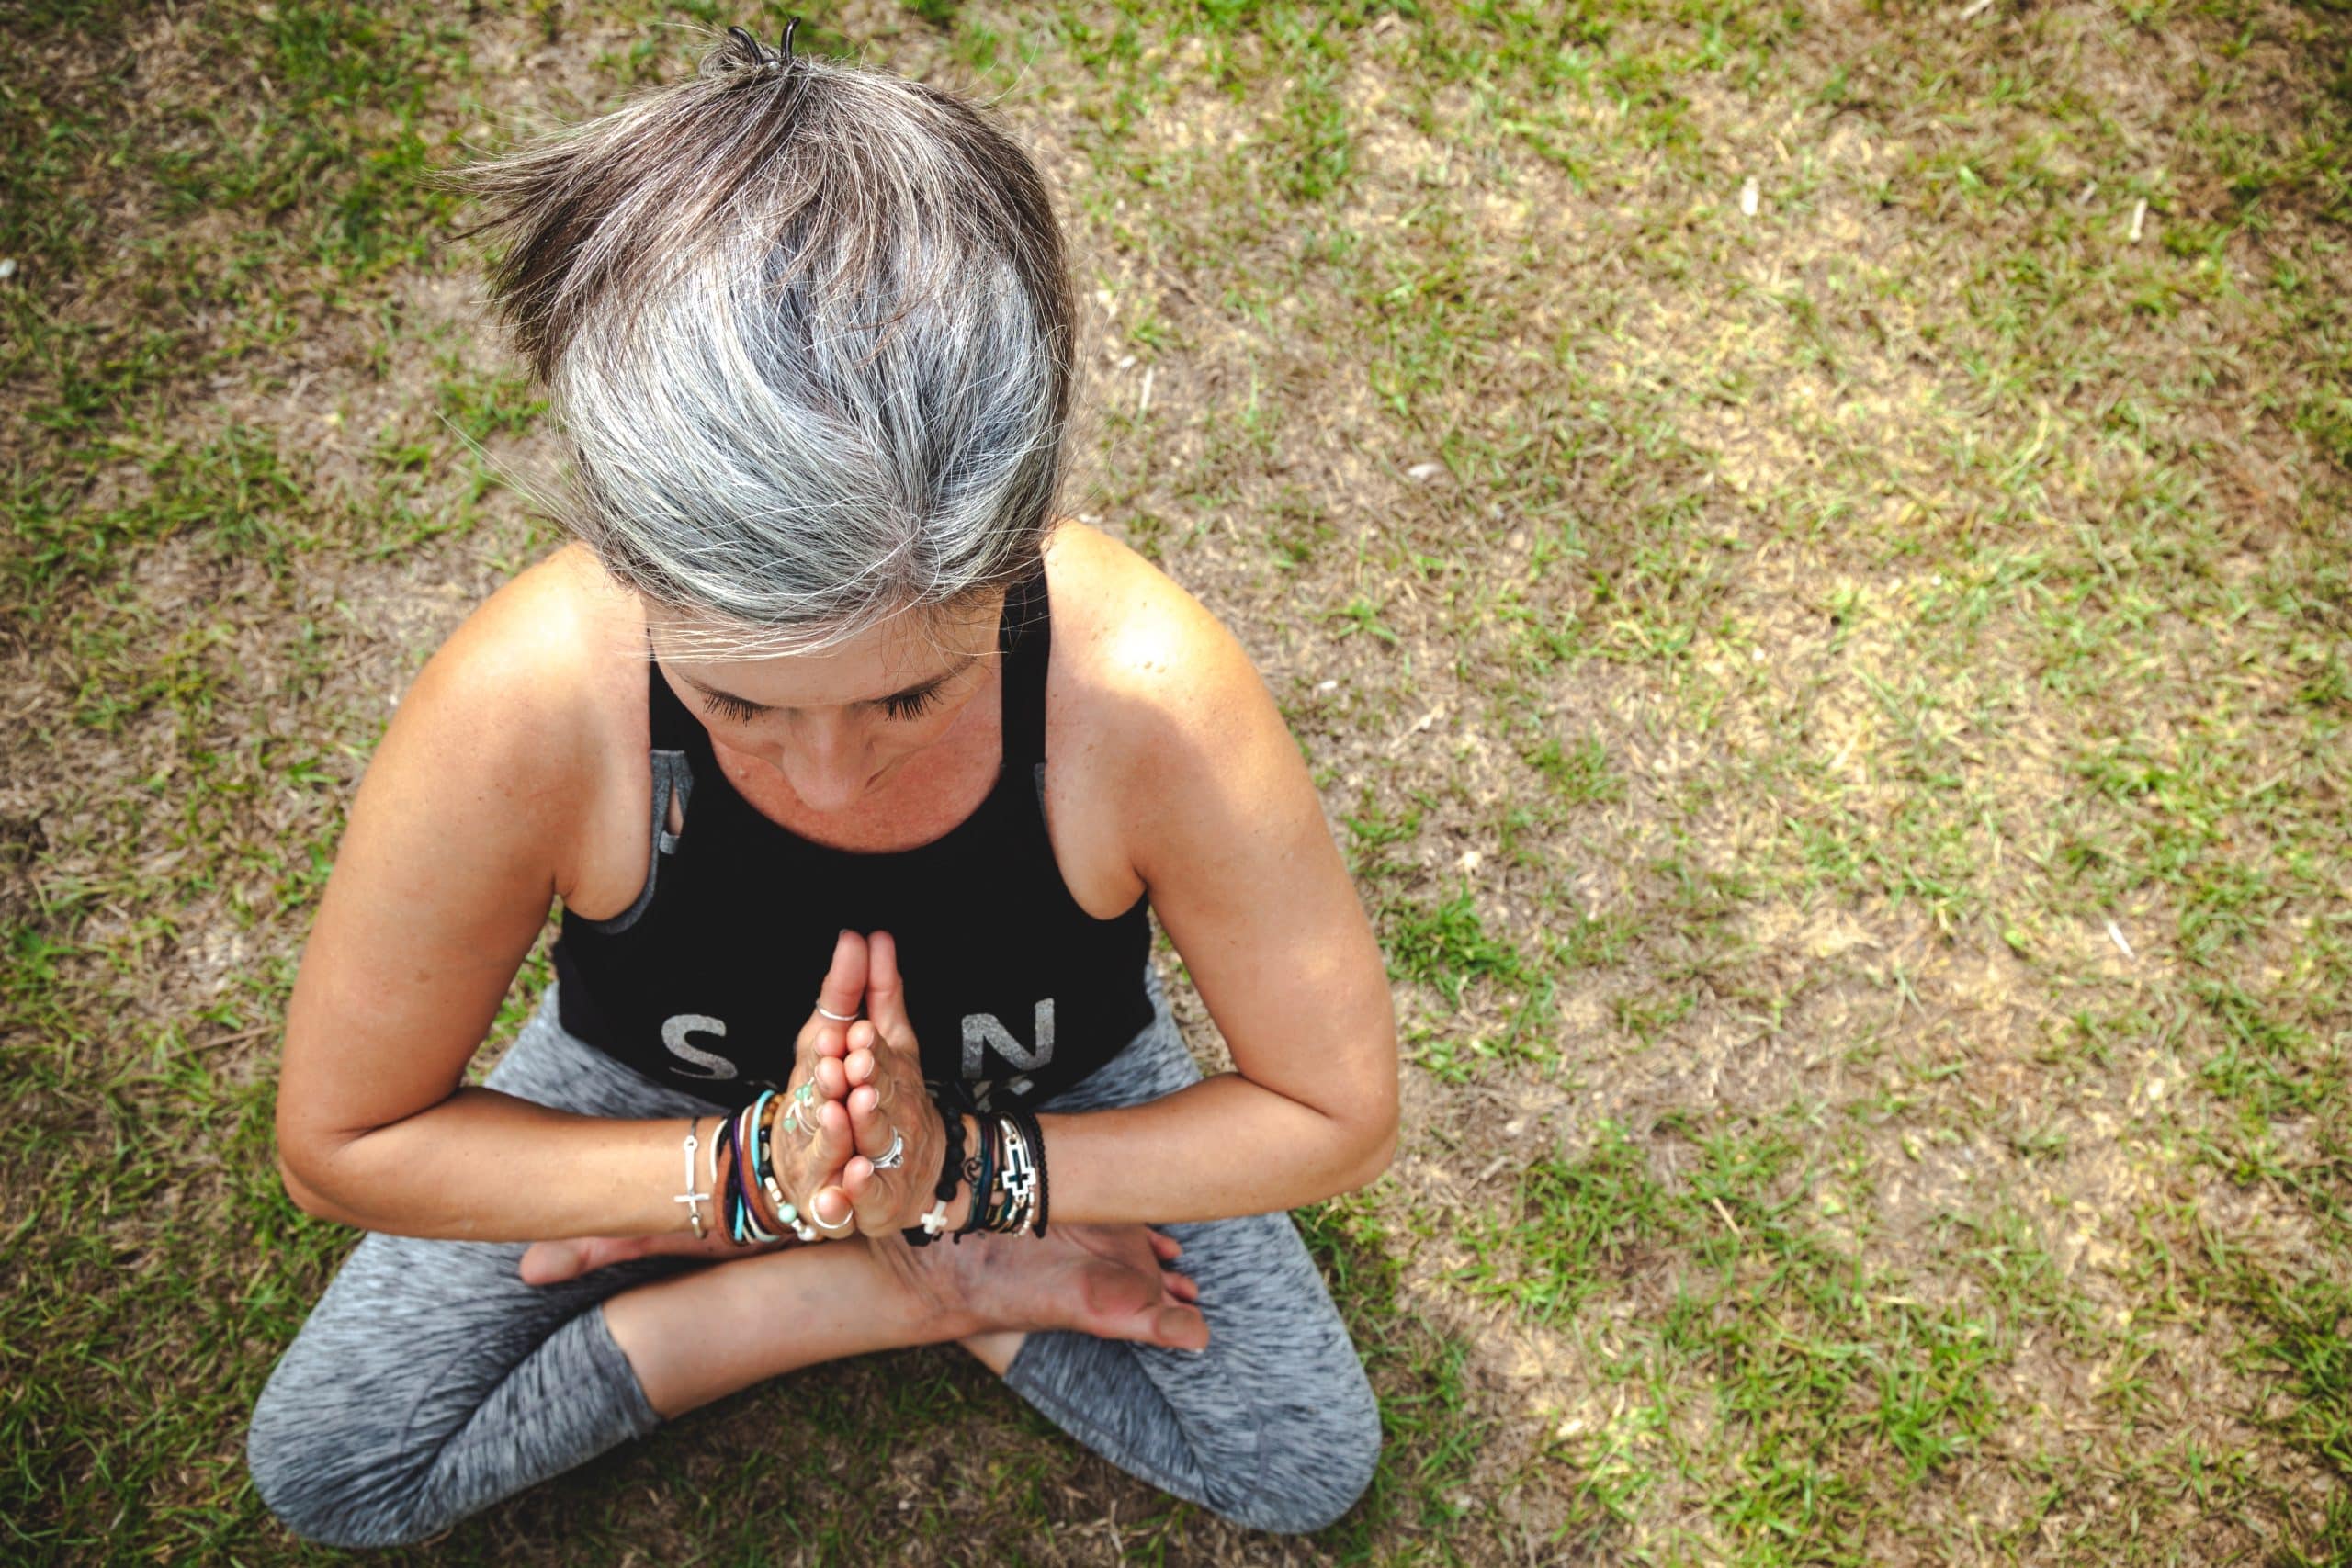 Top-down view of a woman with graying hair sitting in a yoga pose on the grass, symbolizing hormone balance